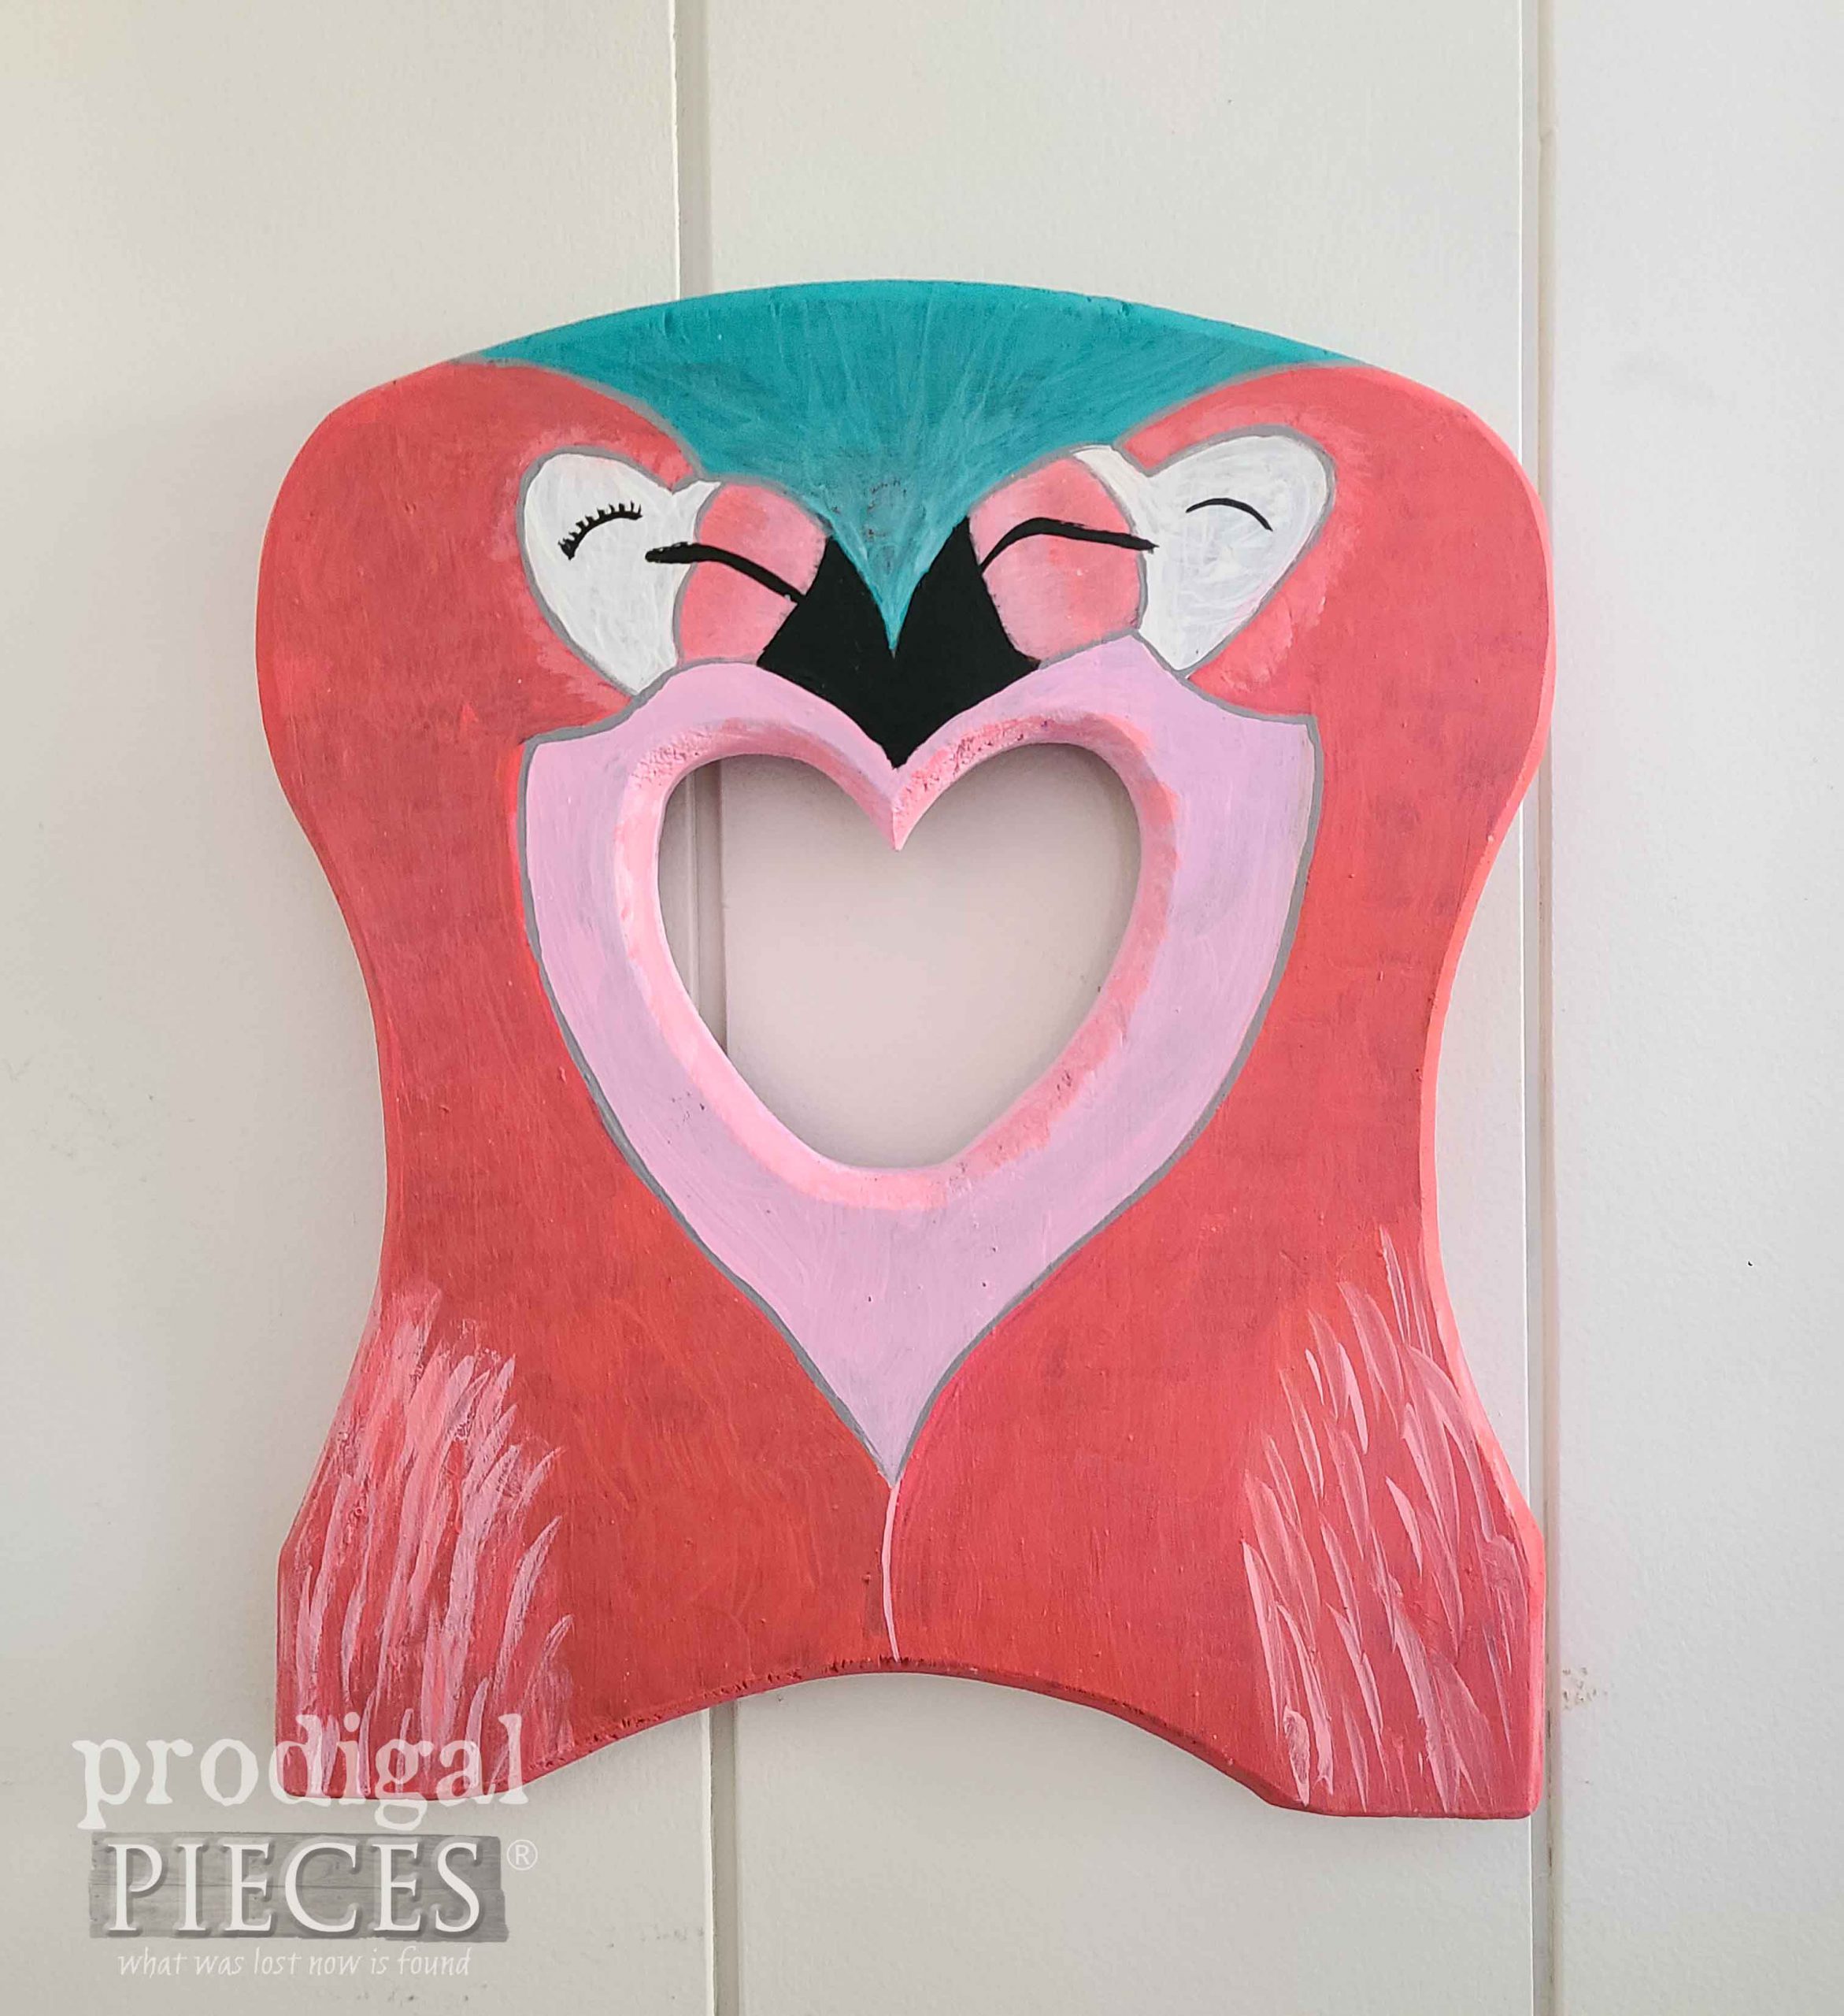 Hand-Painted Flamingo Art from Heart Cut-Out Furniture Upcycle by Larissa of Prodigal Pieces | prodigalpieces.com #prodigalpieces #art #upcycled #diy